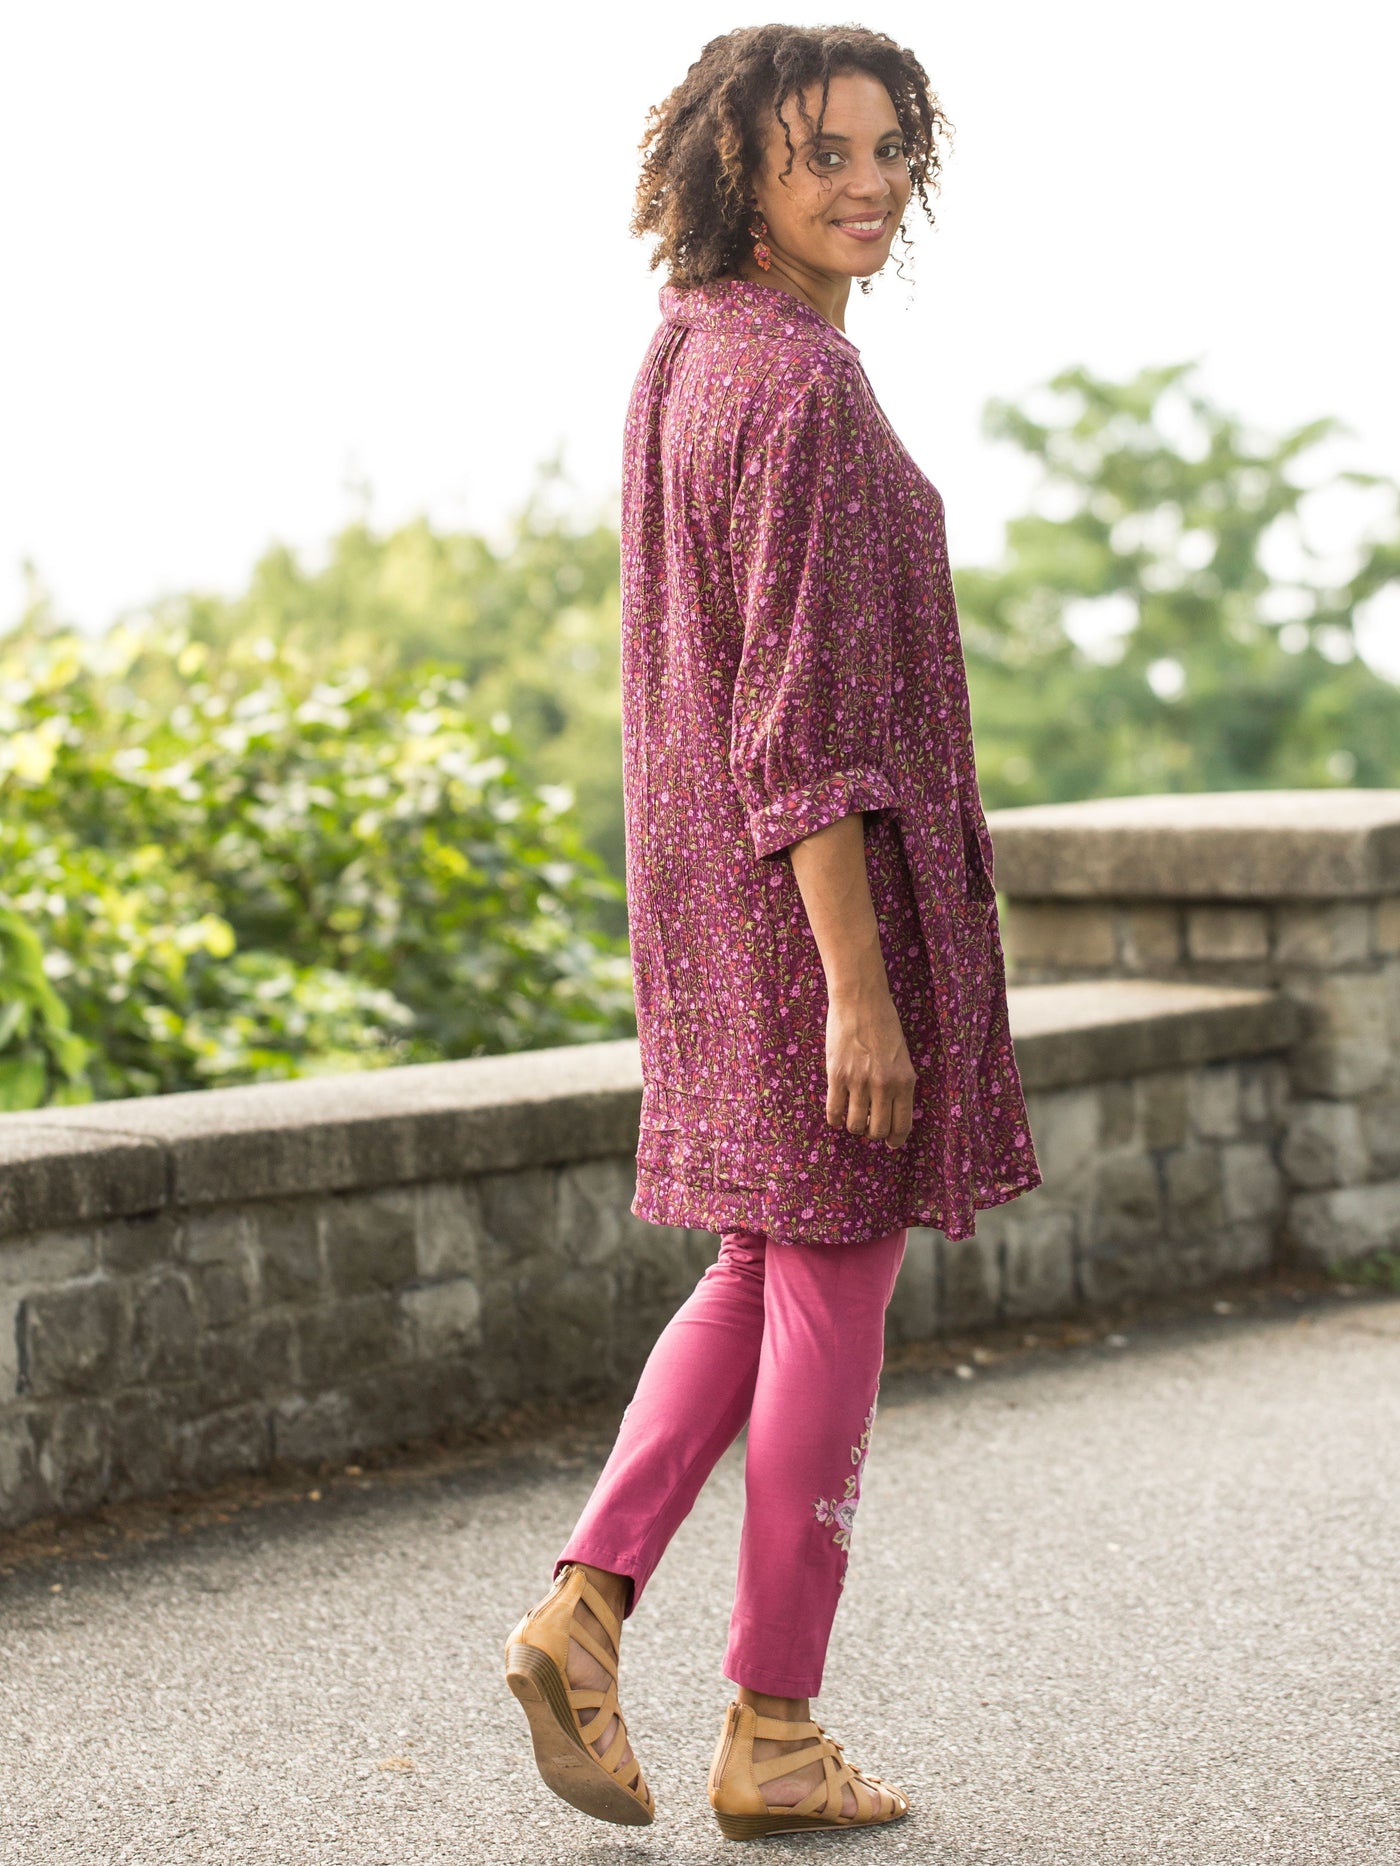 Romantic Courtyard Tunic in Purple | April Cornell - SOLD OUT